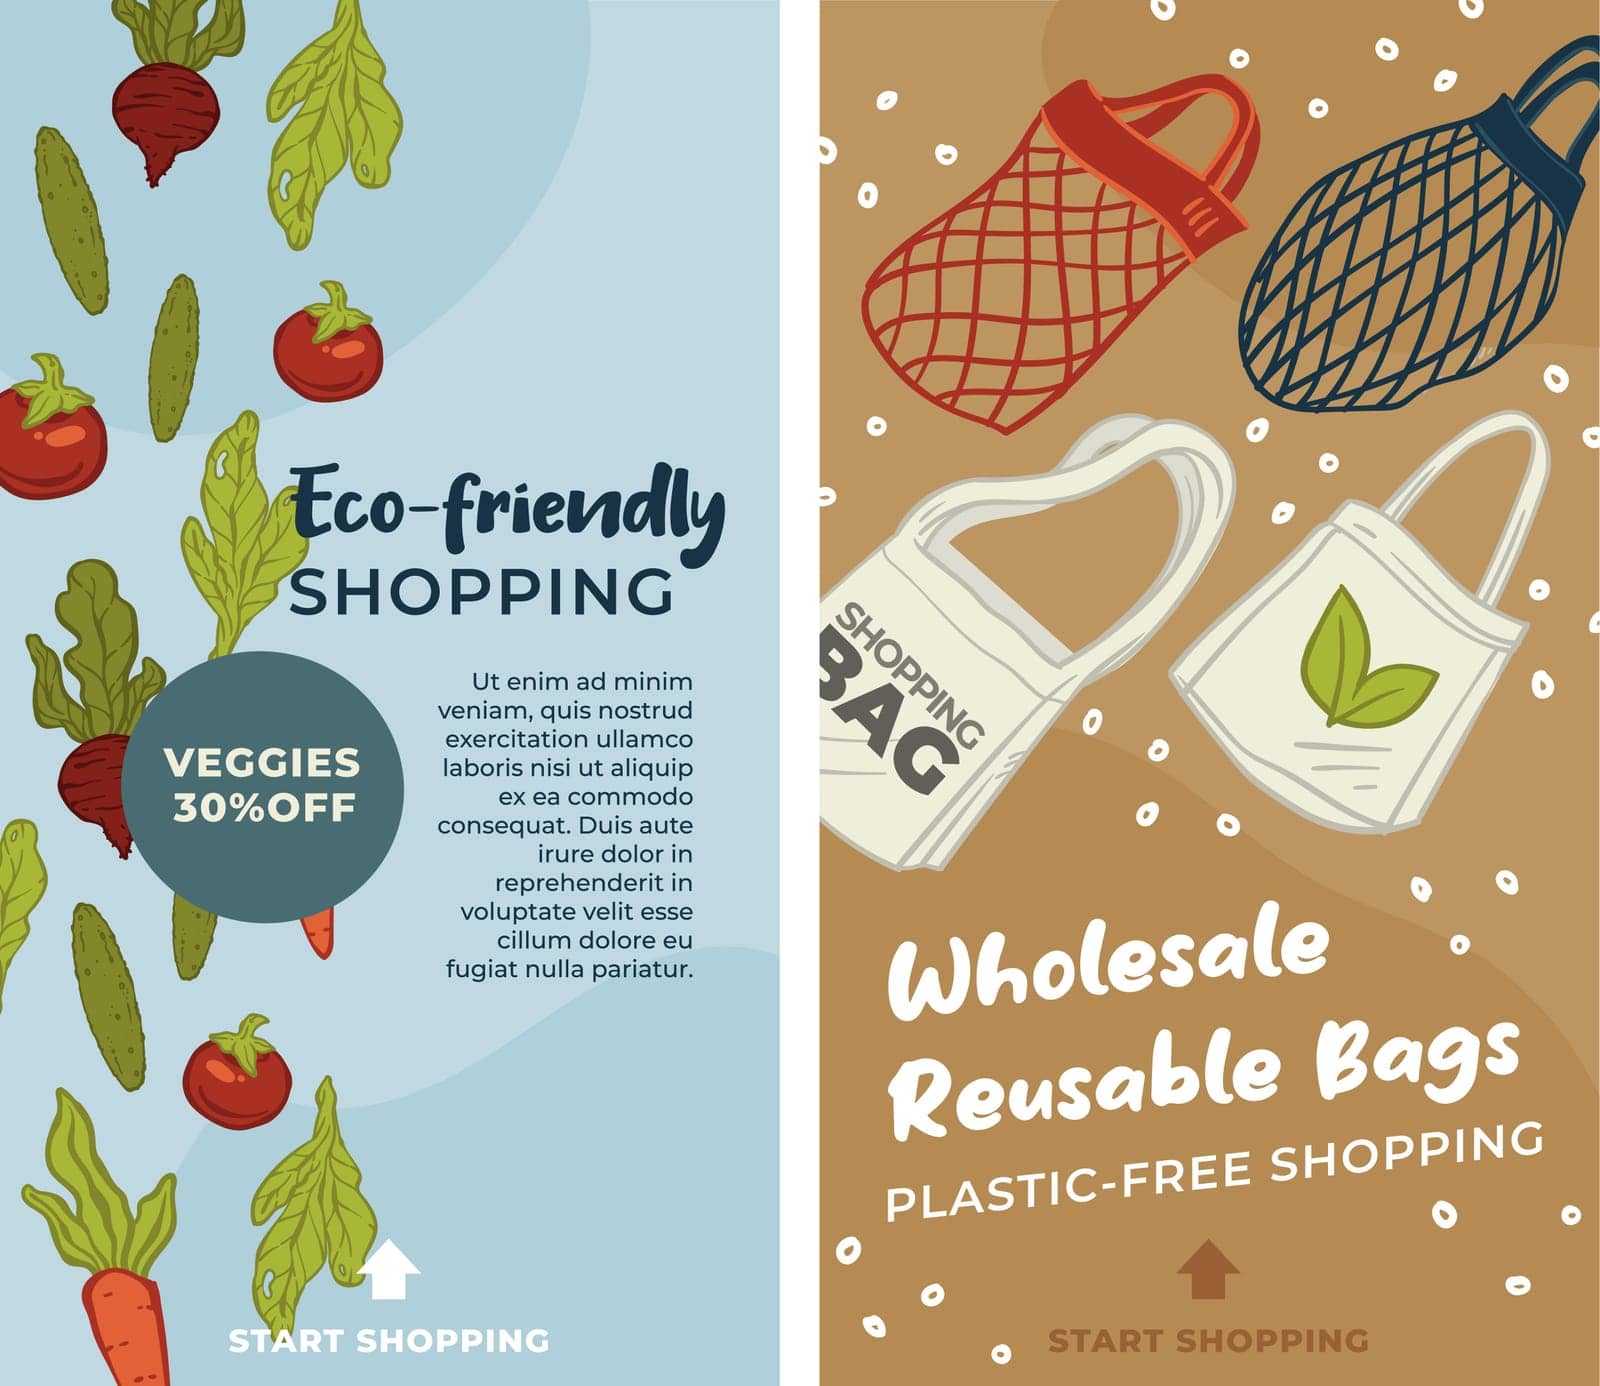 Eco friendly shopping, veggies and reusable bags by Sonulkaster